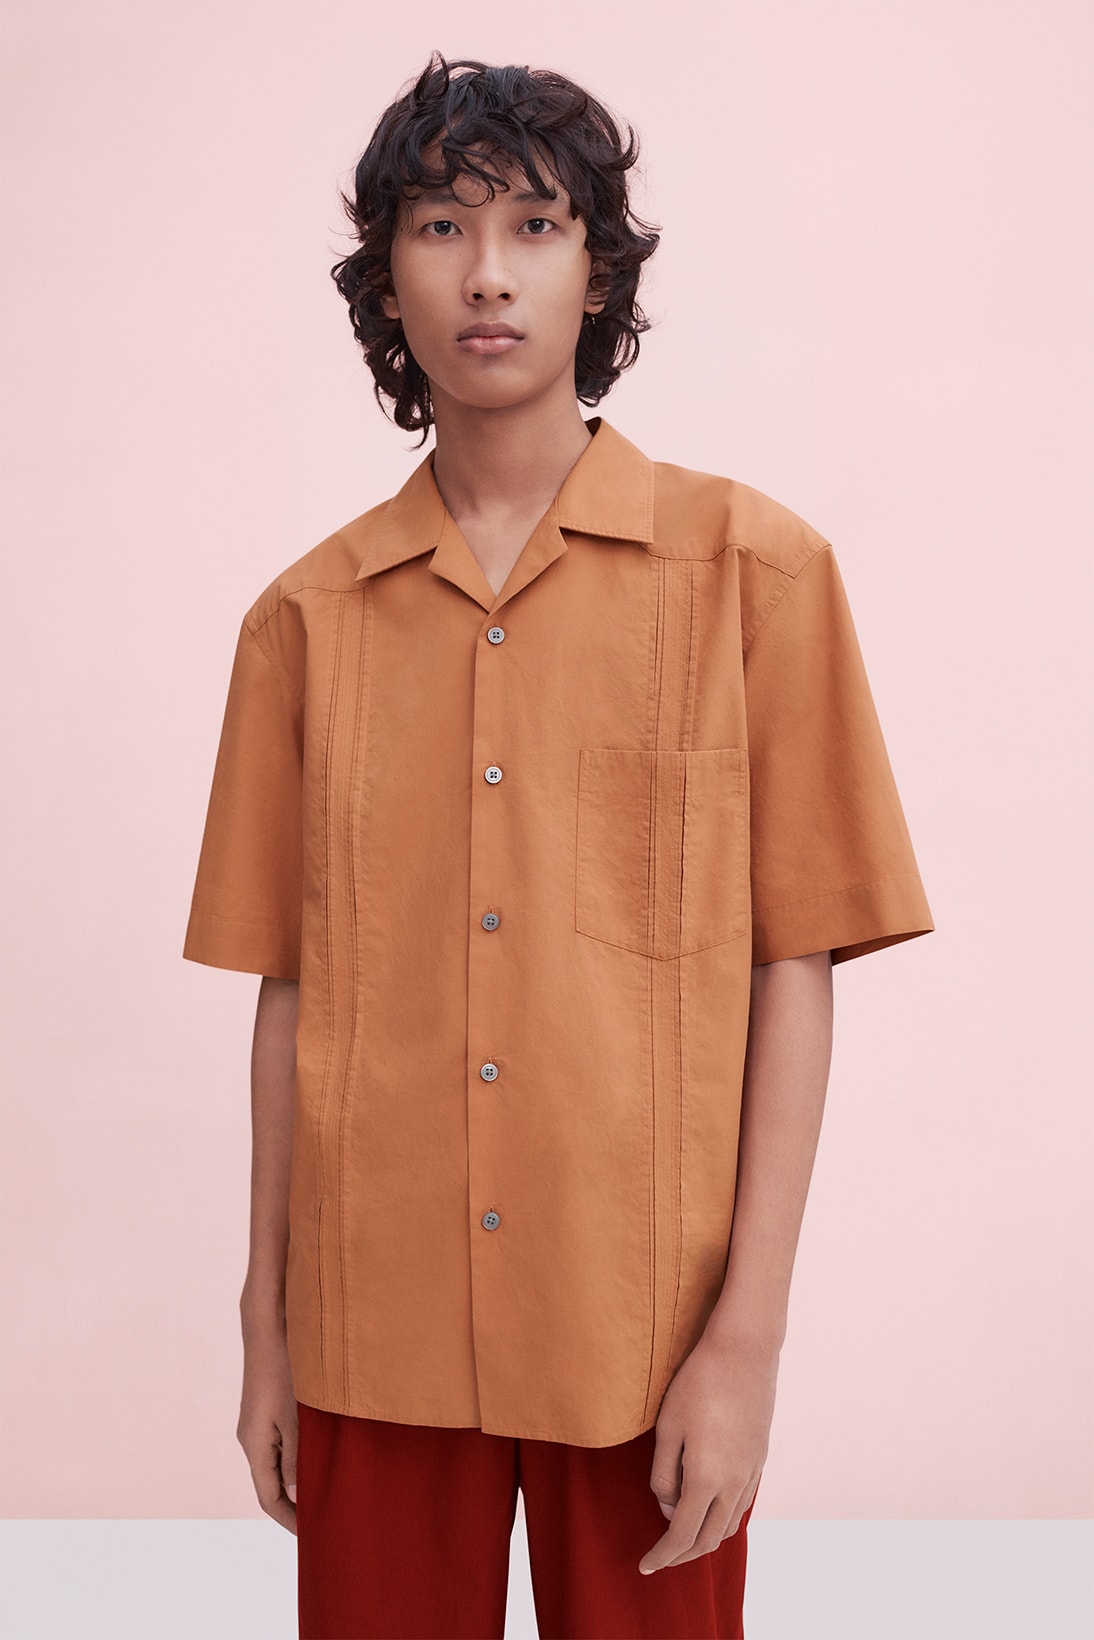 The Best Looks From the Uniqlo U Fall 2020 Collection